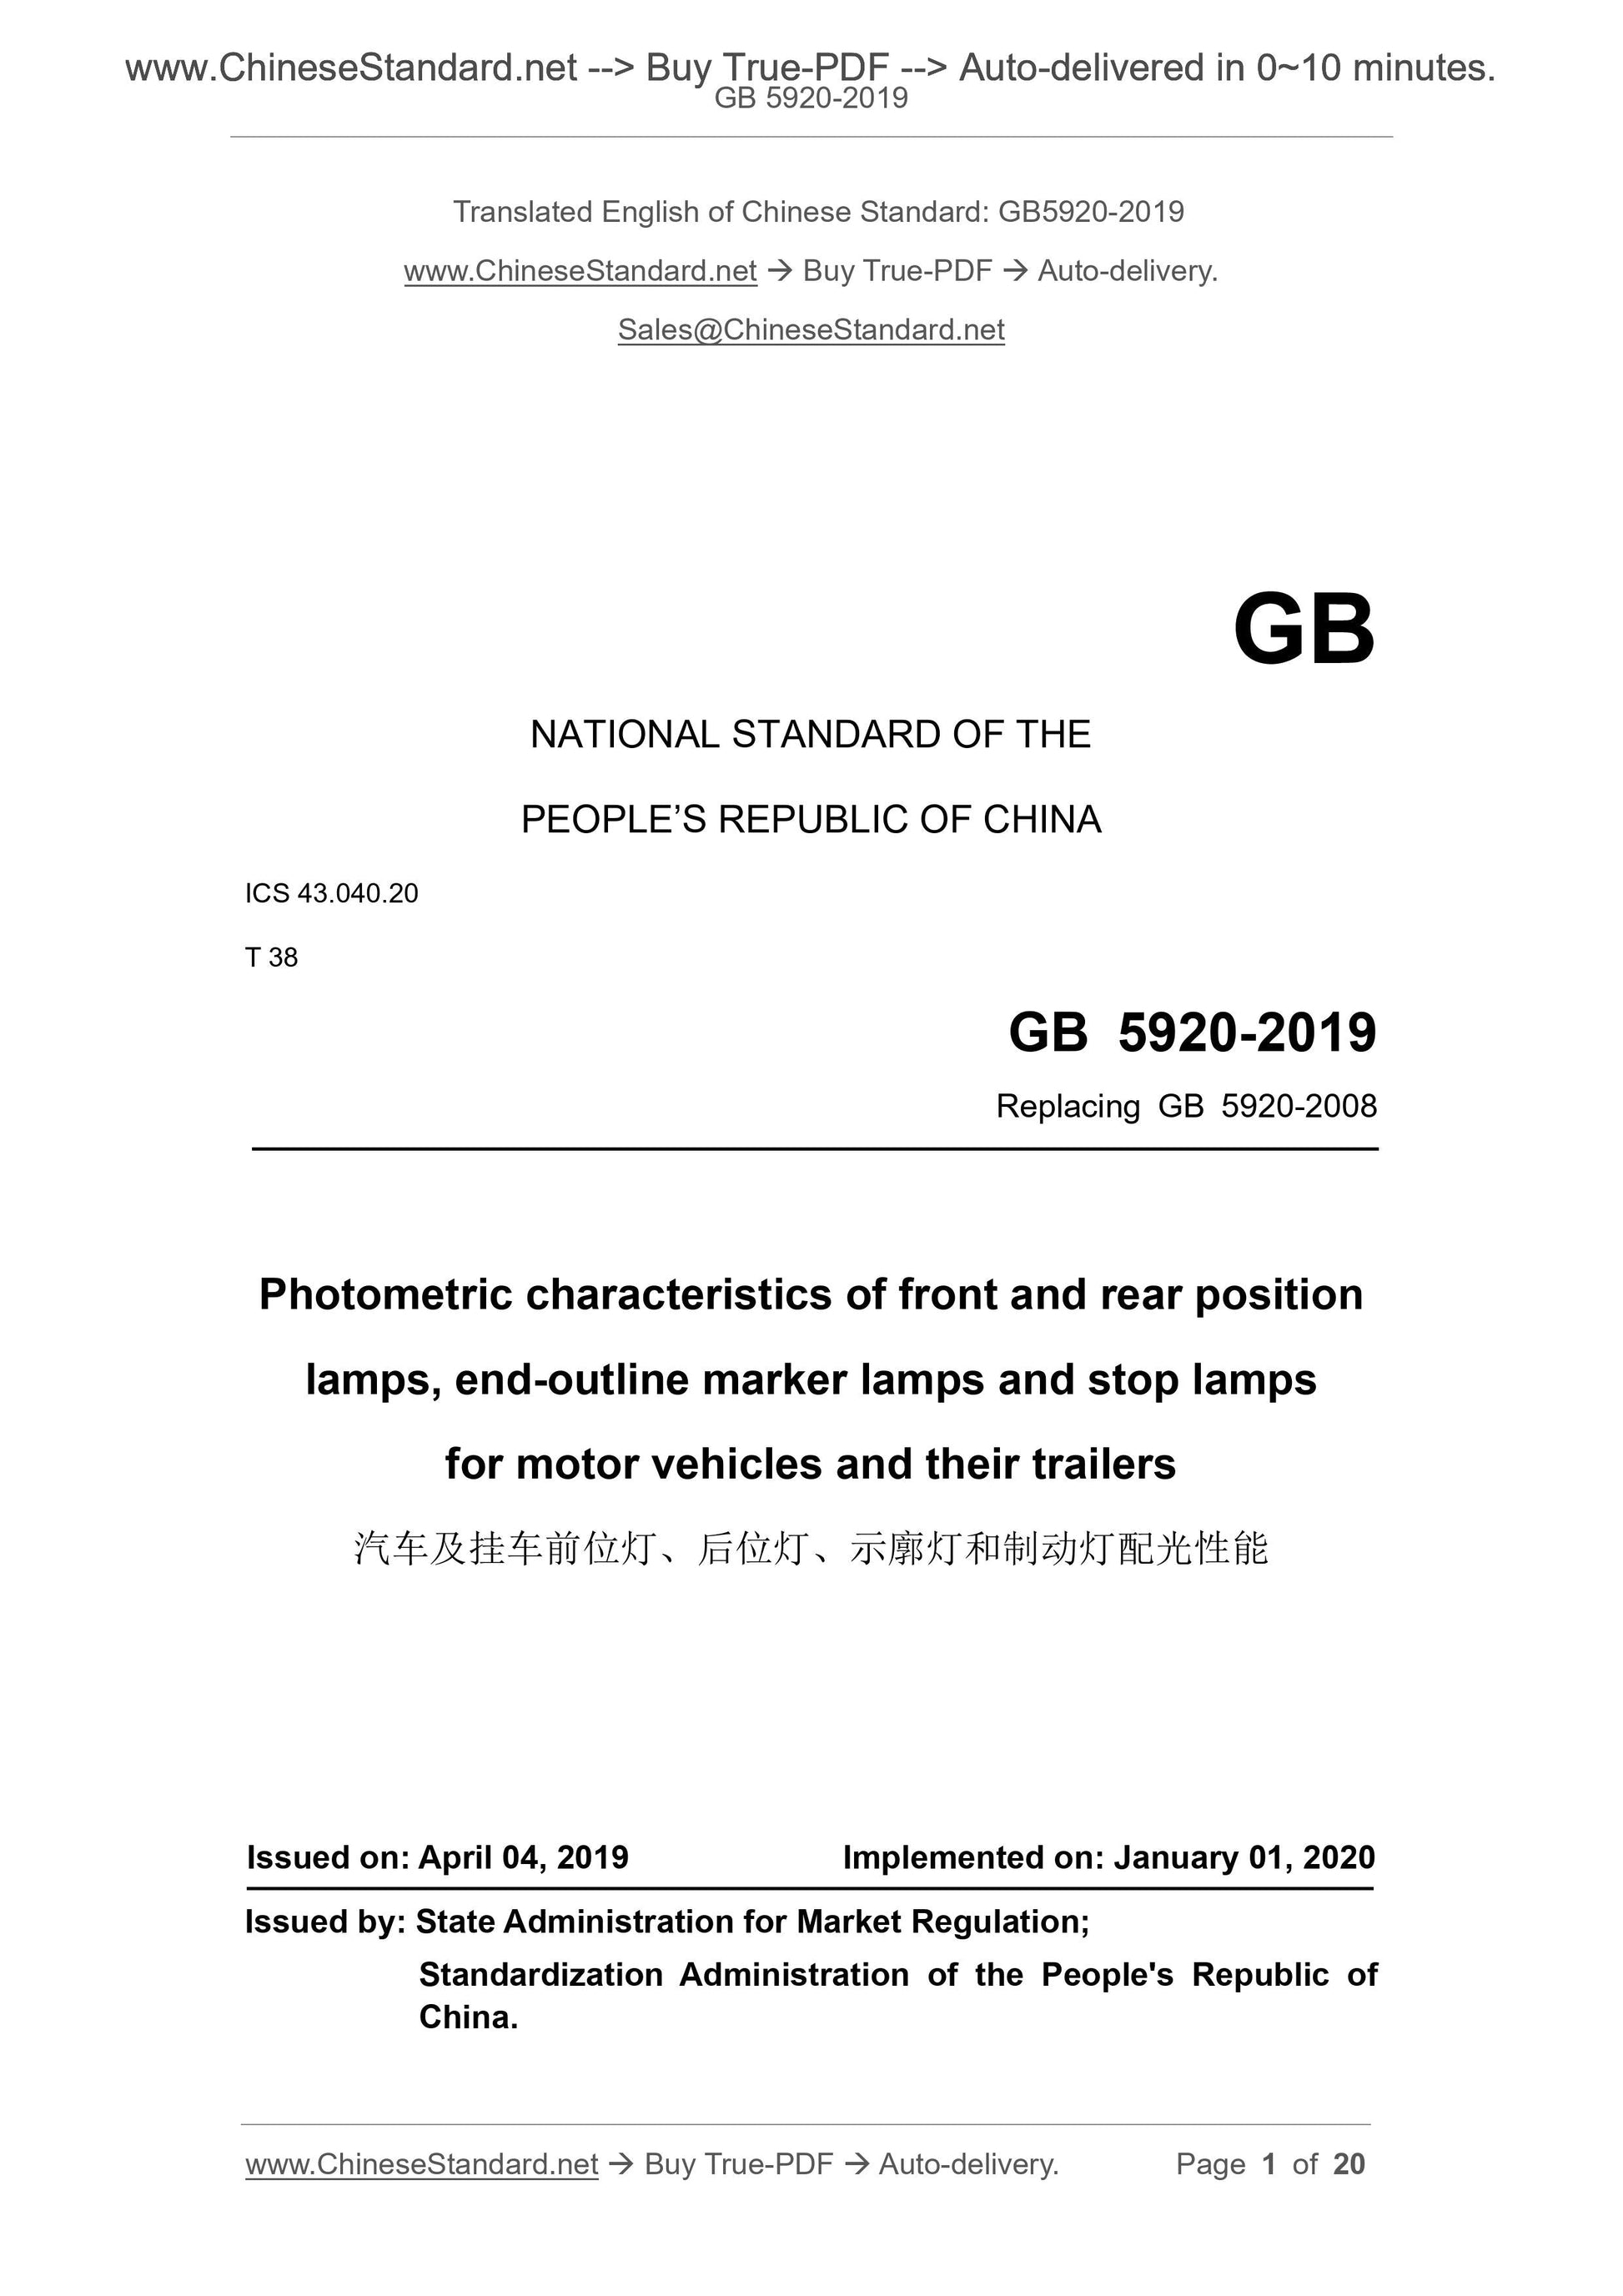 GB 5920-2019 Page 1